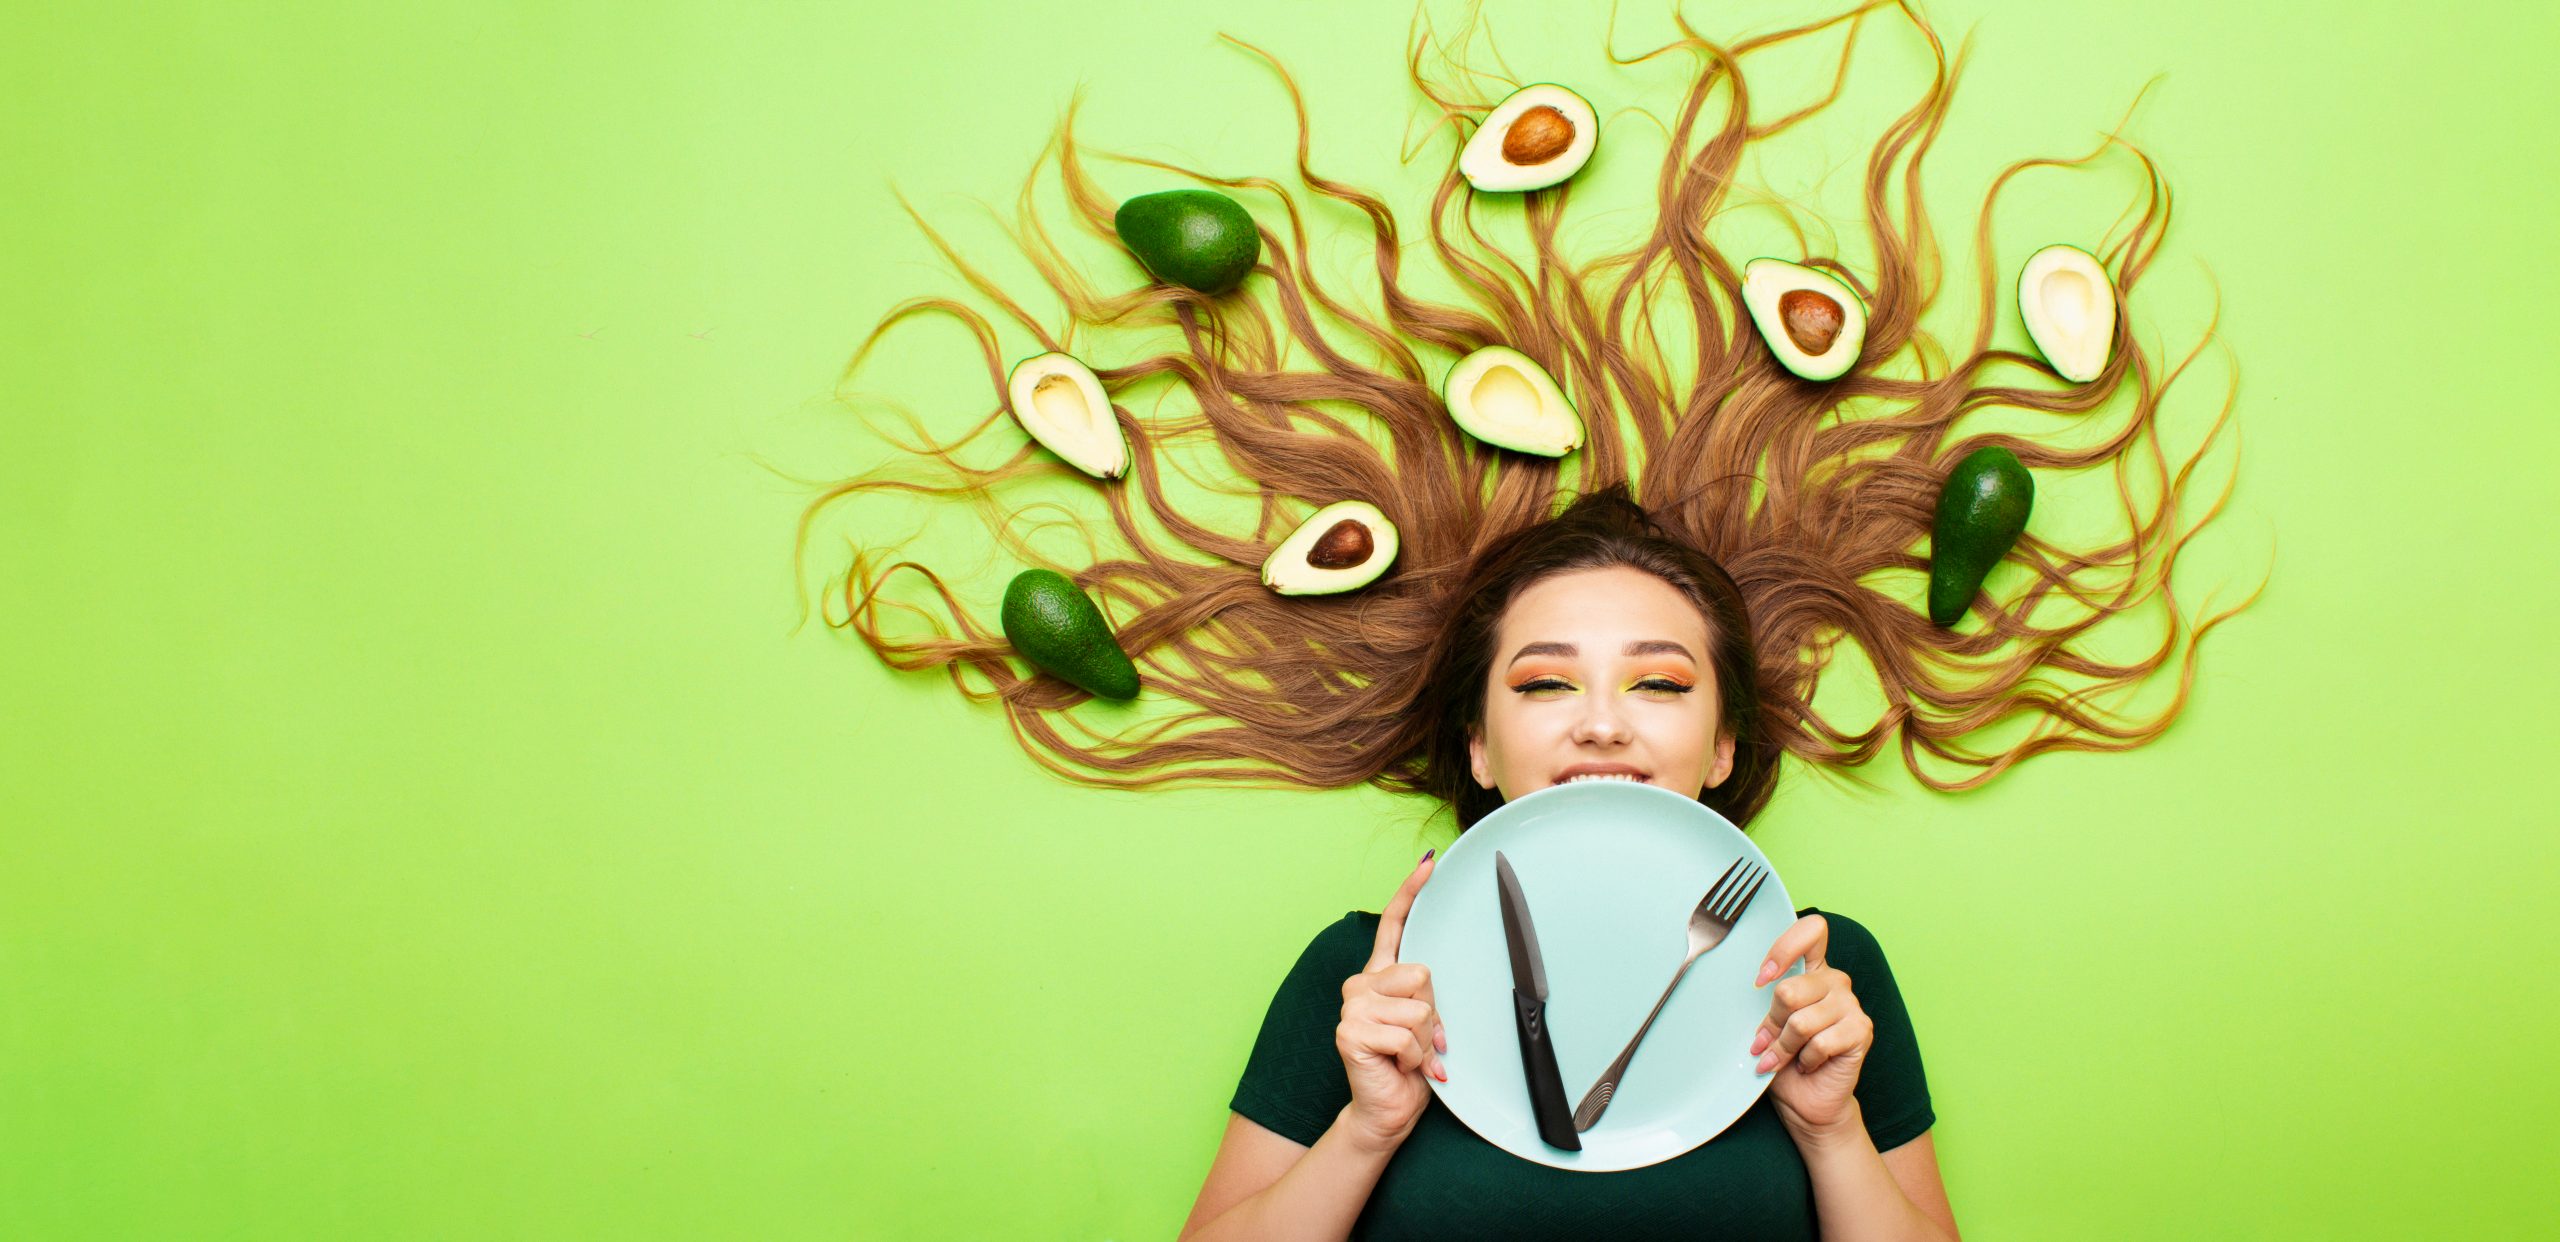 Easy Trick to Improve Your Hair Health: Eat a Balanced Diet